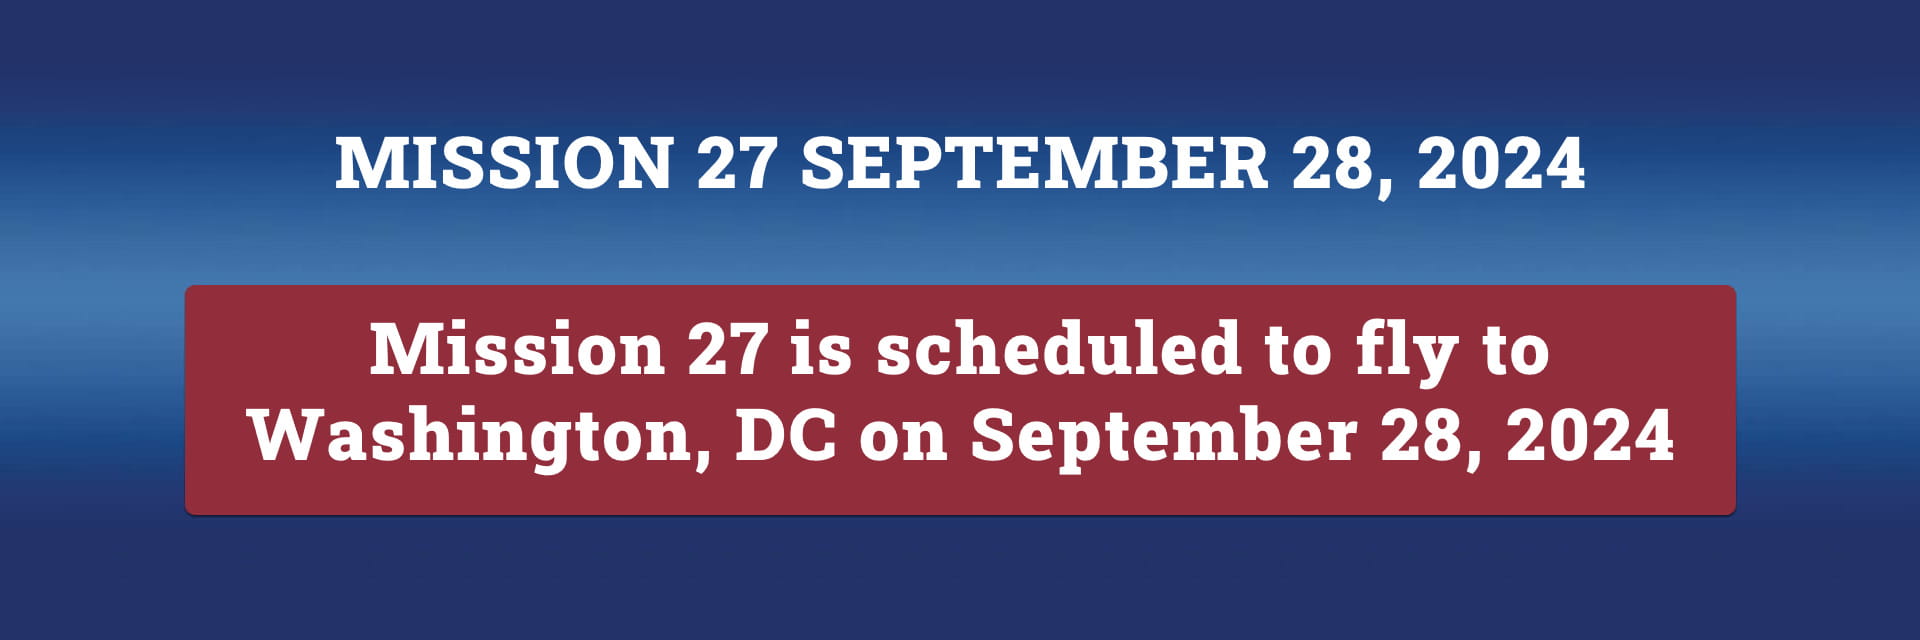 Mission 27 is scheduled to fly to Washington DC on September 28, 2024